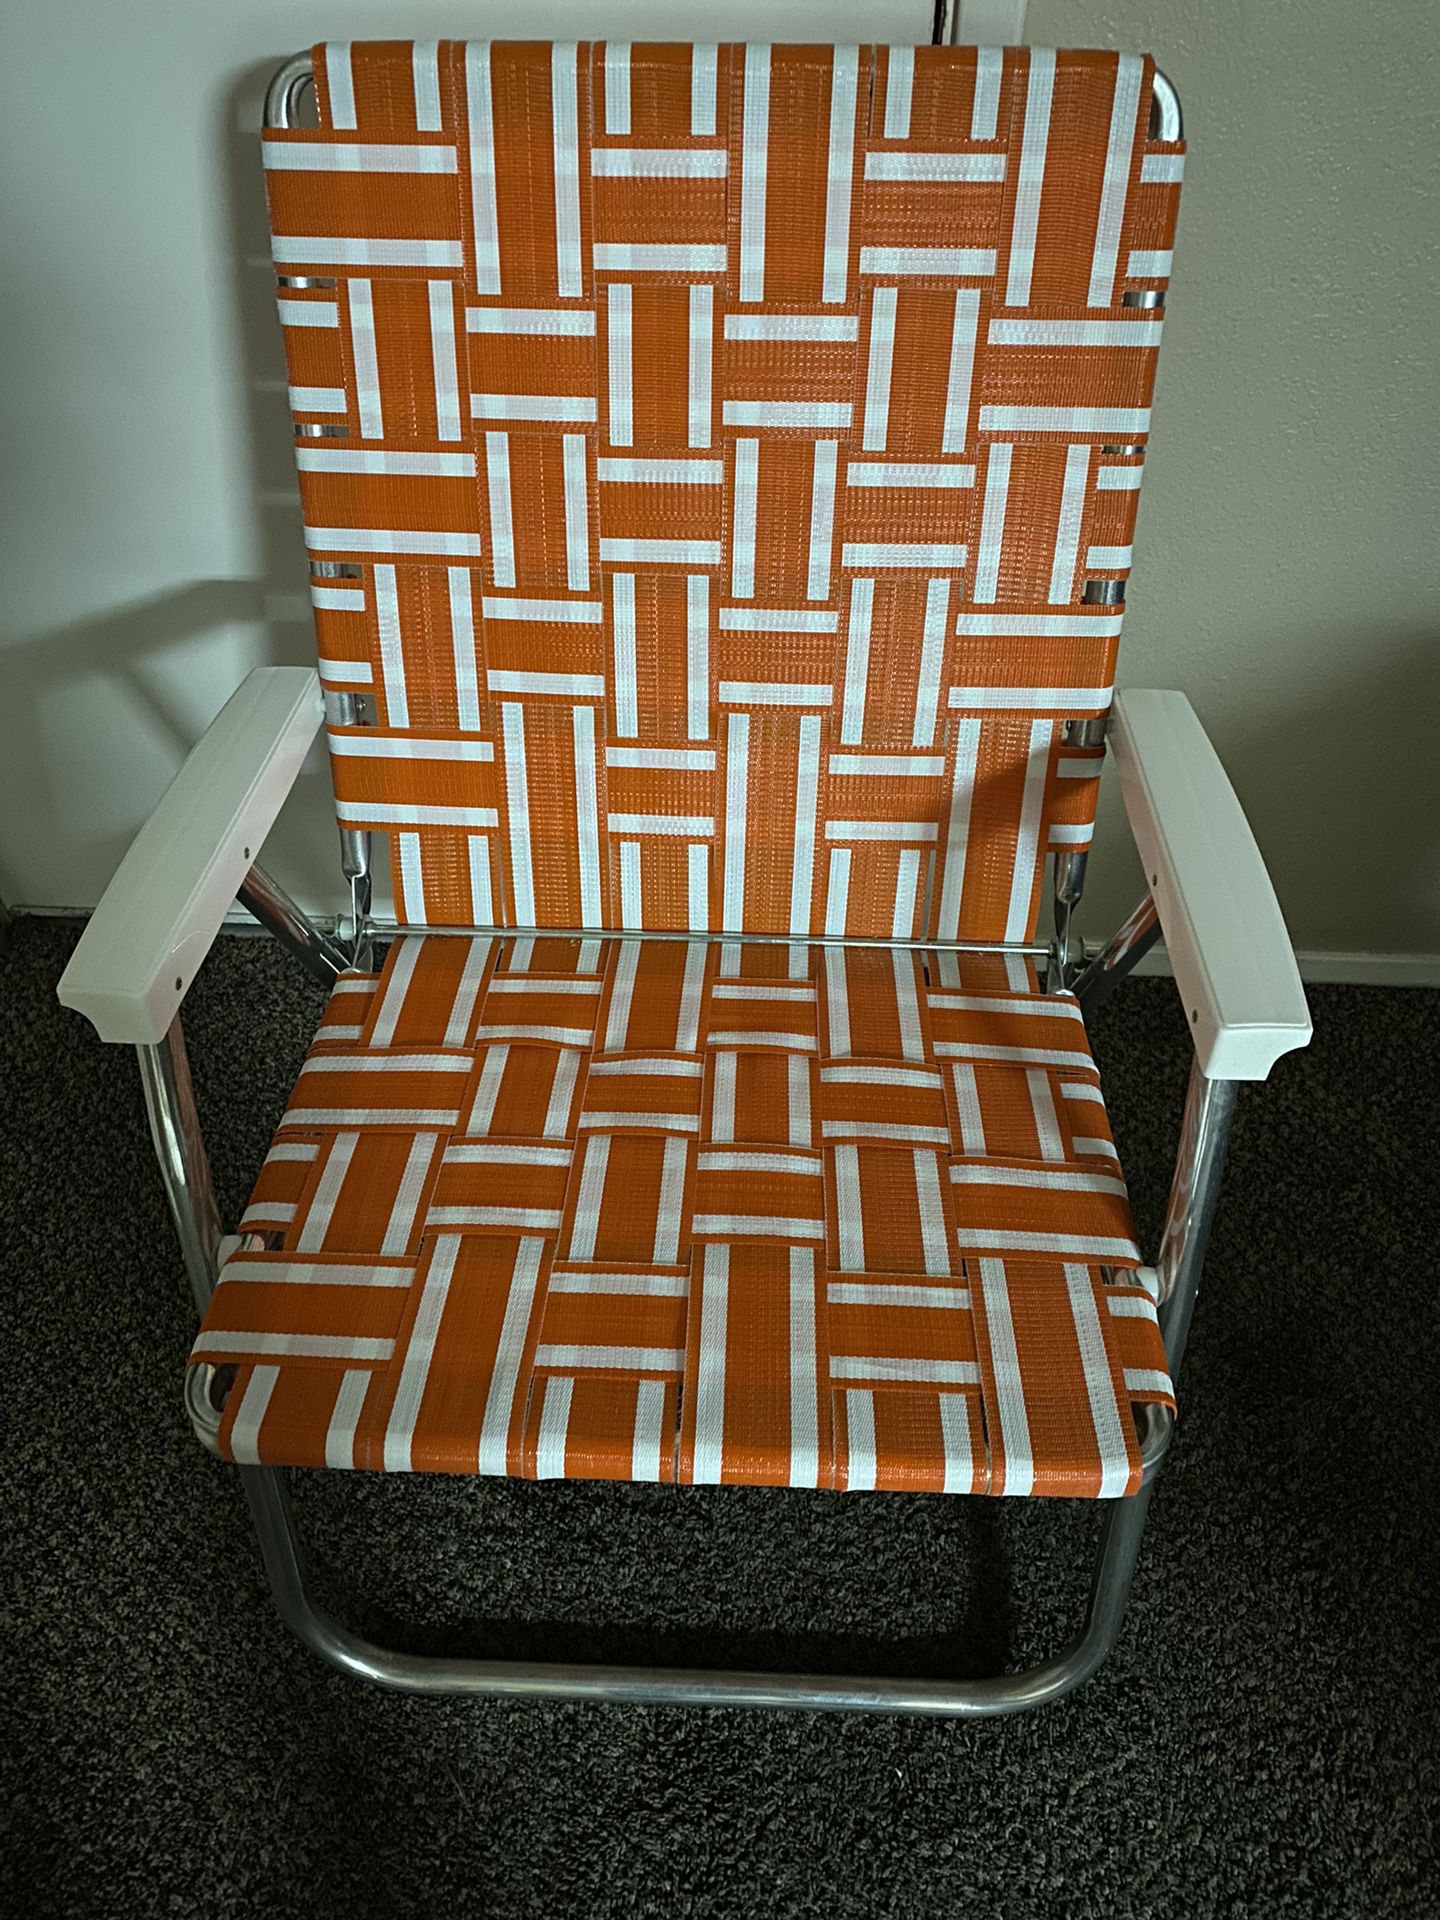 Like New Vintage Style Folding Chair 